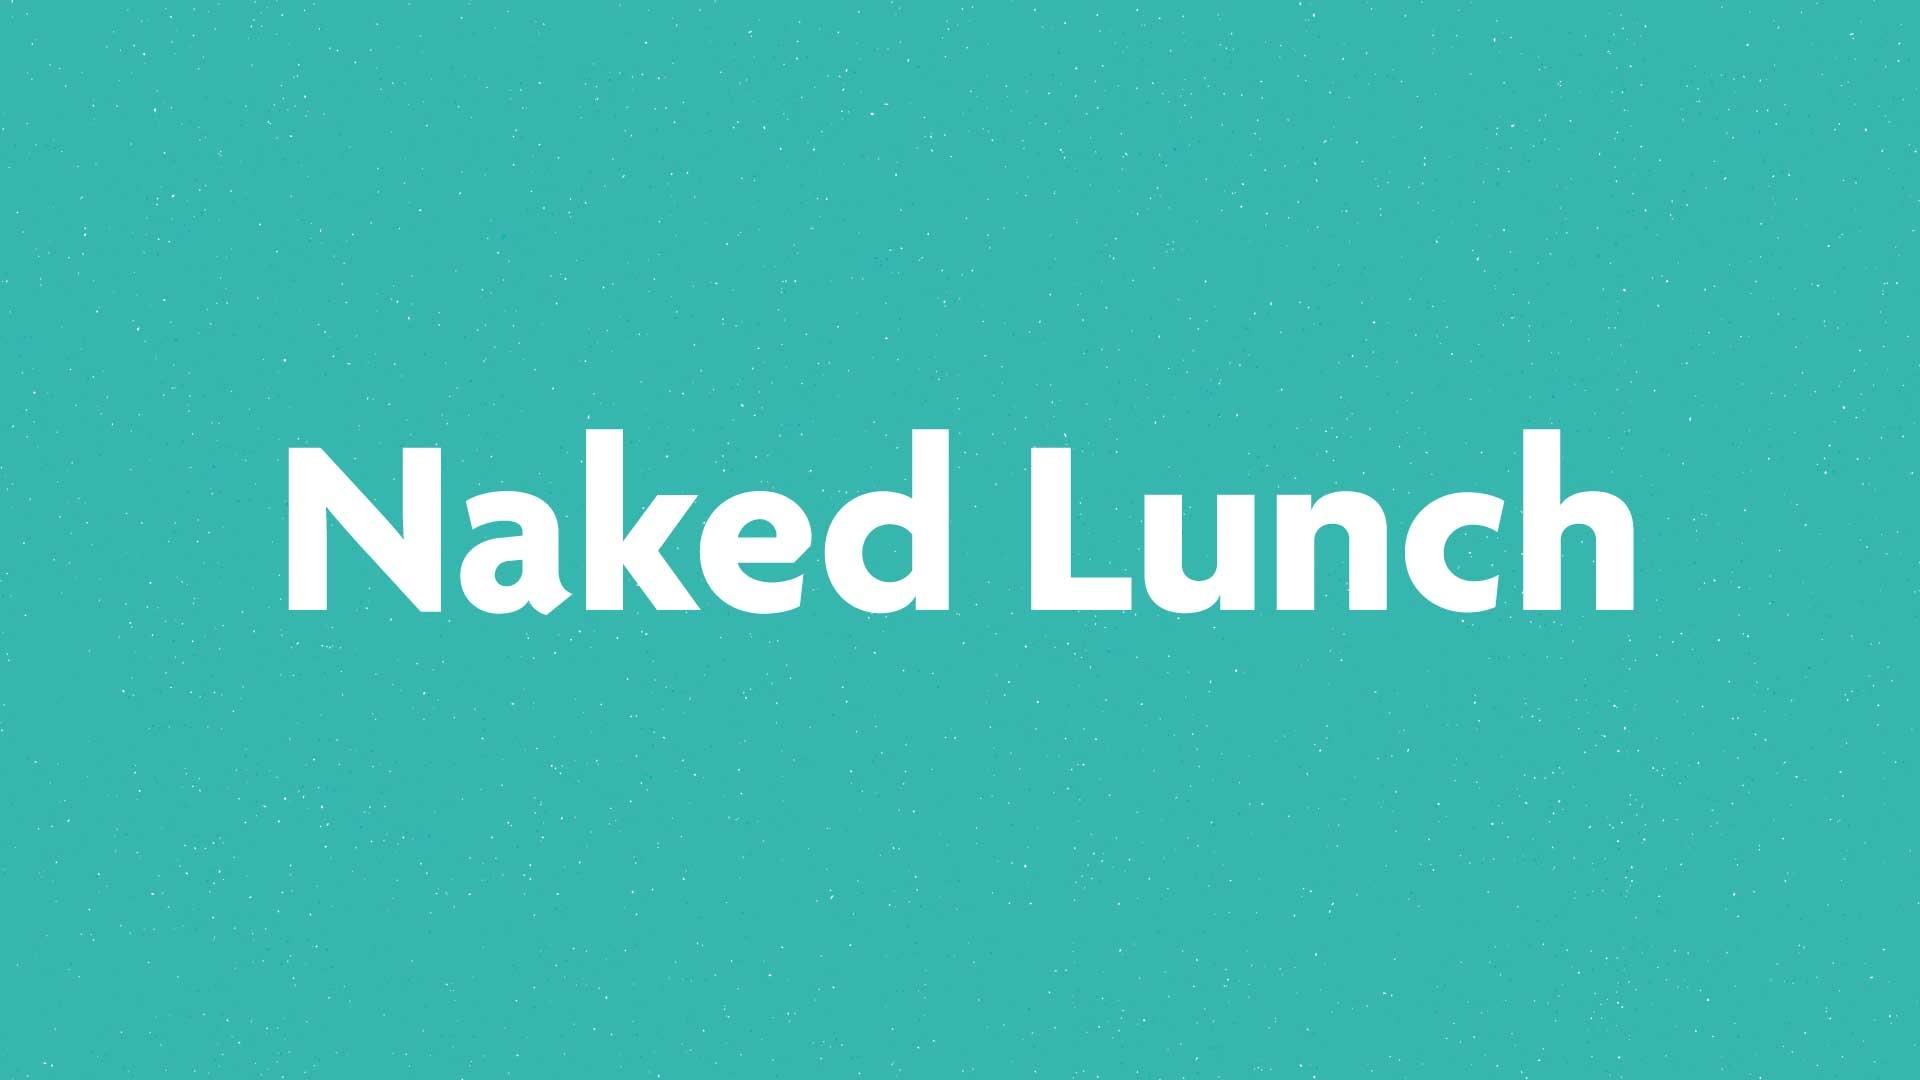 Naked Lunch book submission card on a green background.